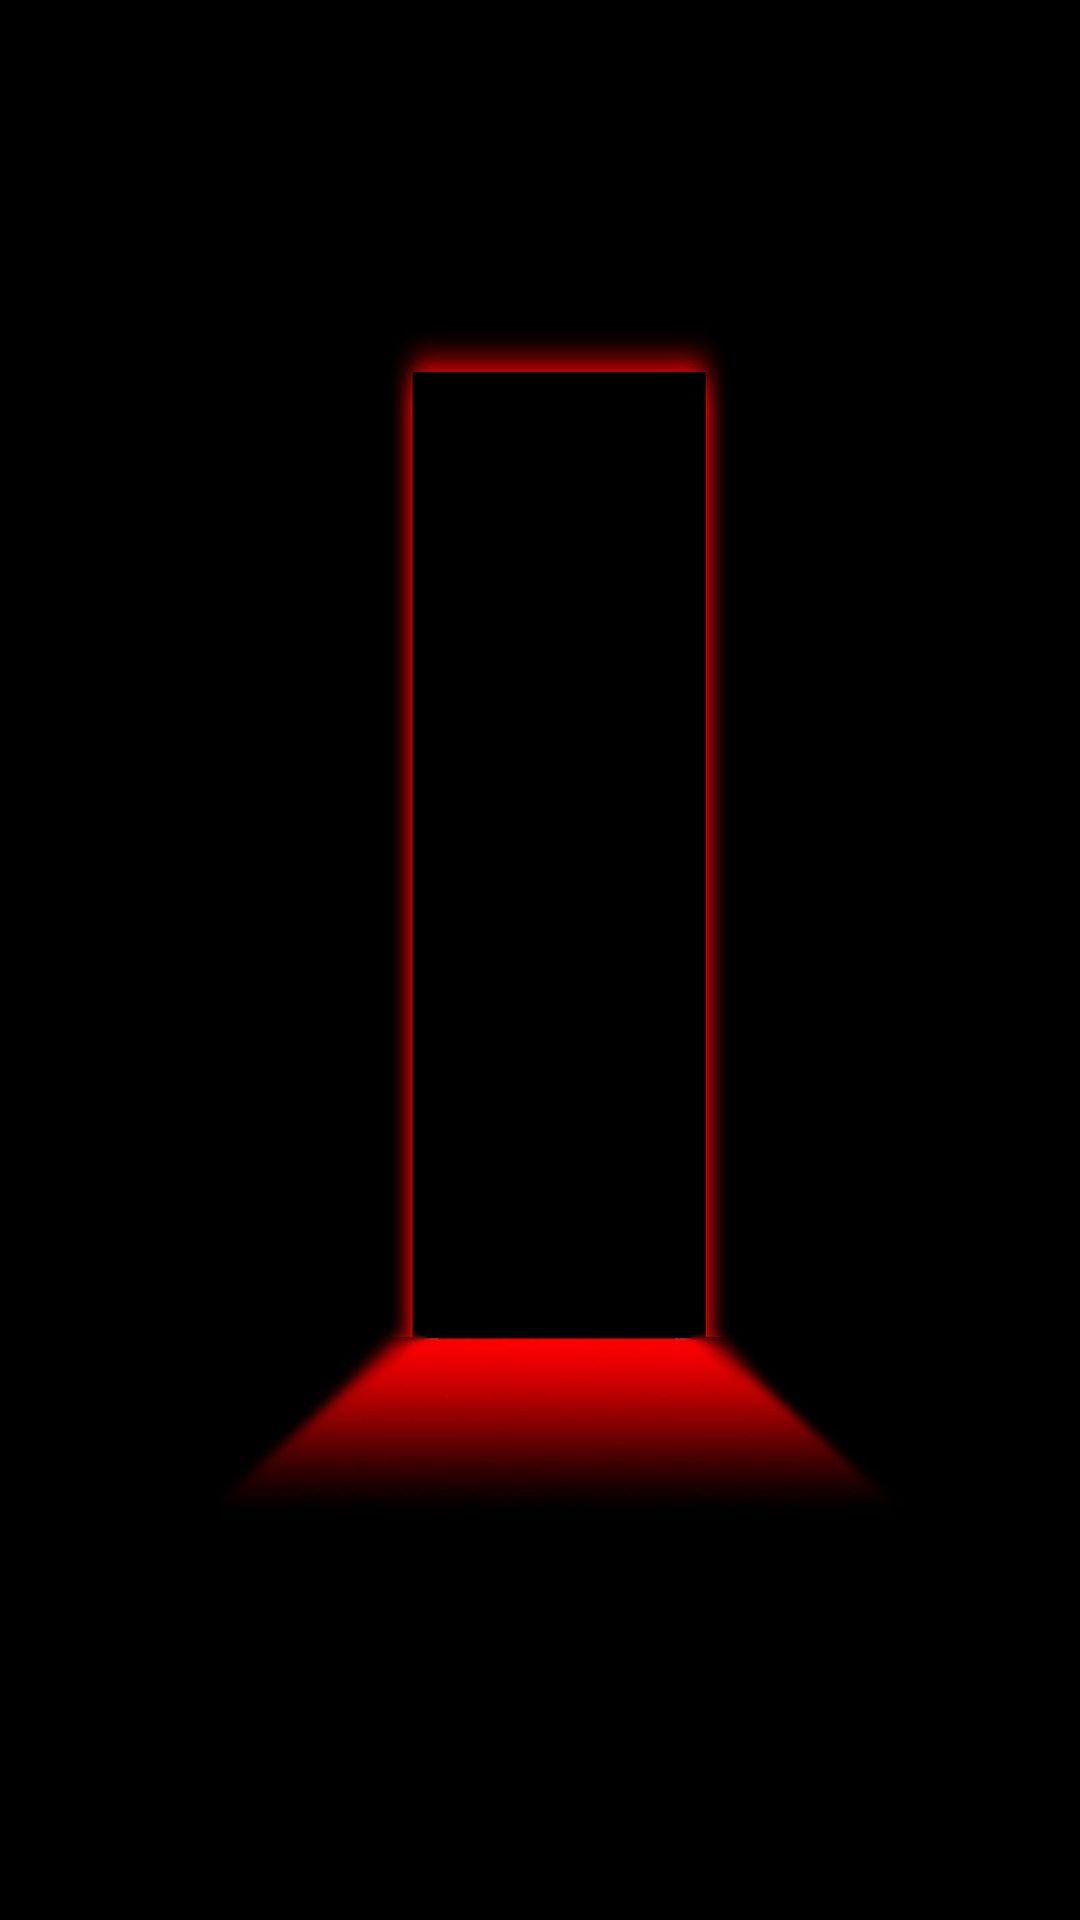 Wallpaper.wiki 3D Black And Red Line Iphone 5s Hd Wallpaper Free